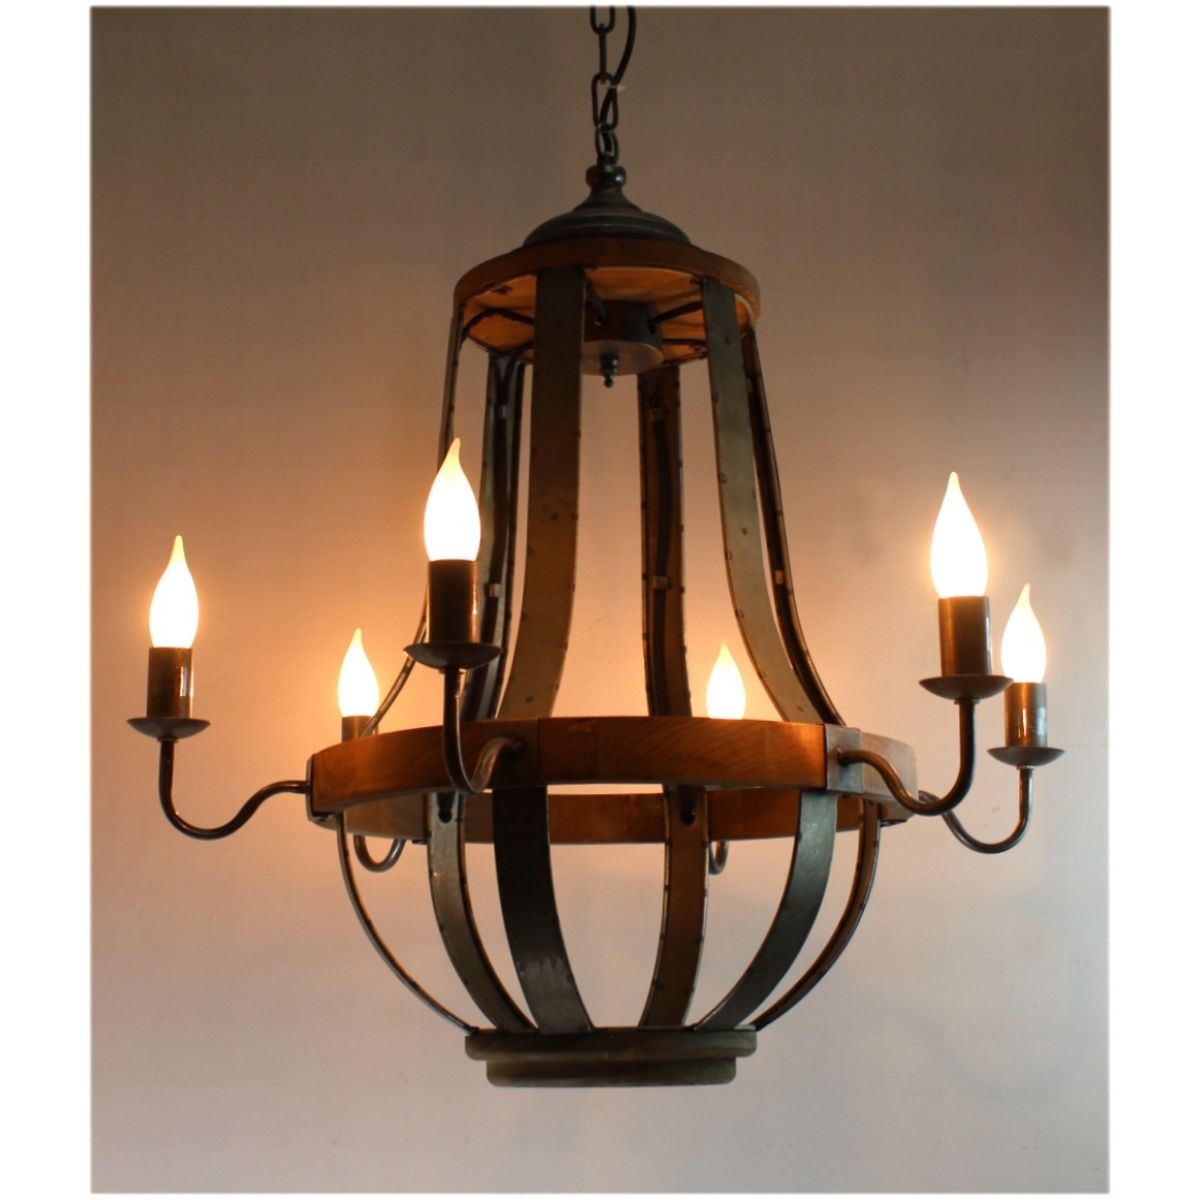 579 Iron Strap And Aged Wood Chandelier French Country Vintage With Vintage Style Chandelier (Photo 12 of 12)